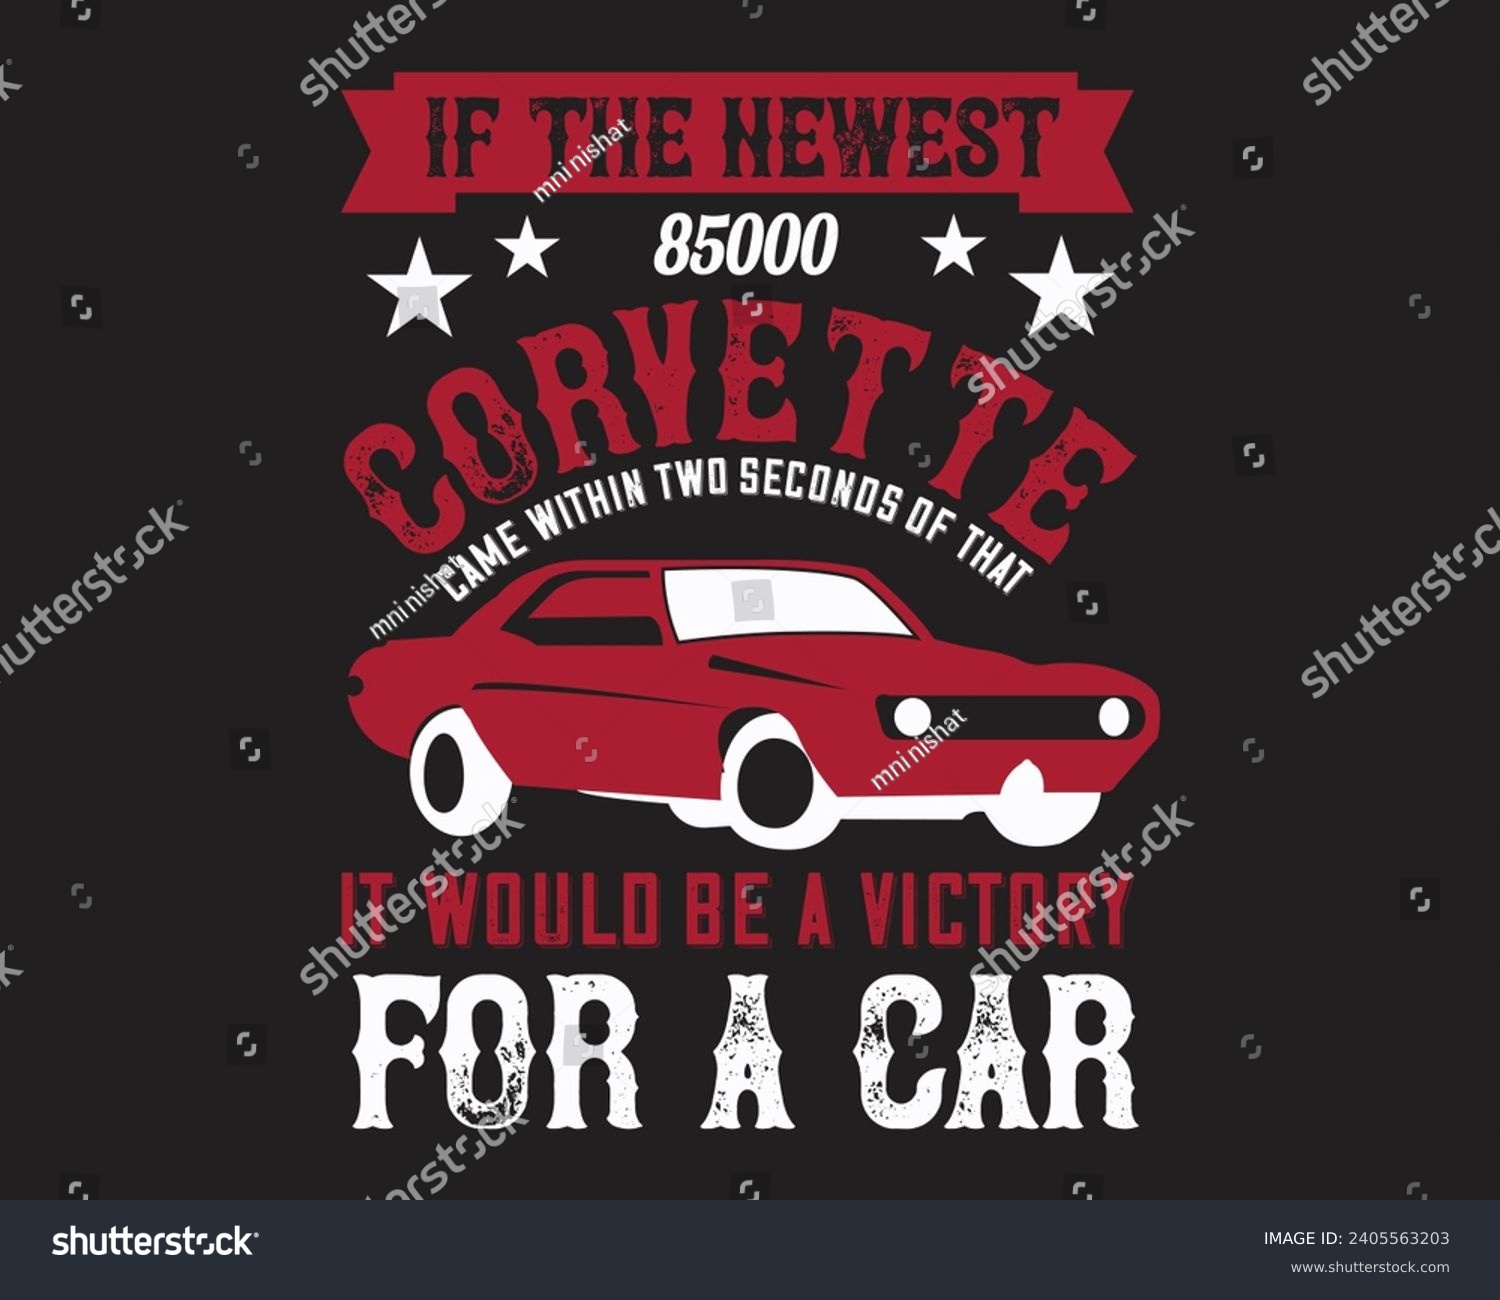 SVG of Are you looking for a If the newest, 85,000 Corvette? svg